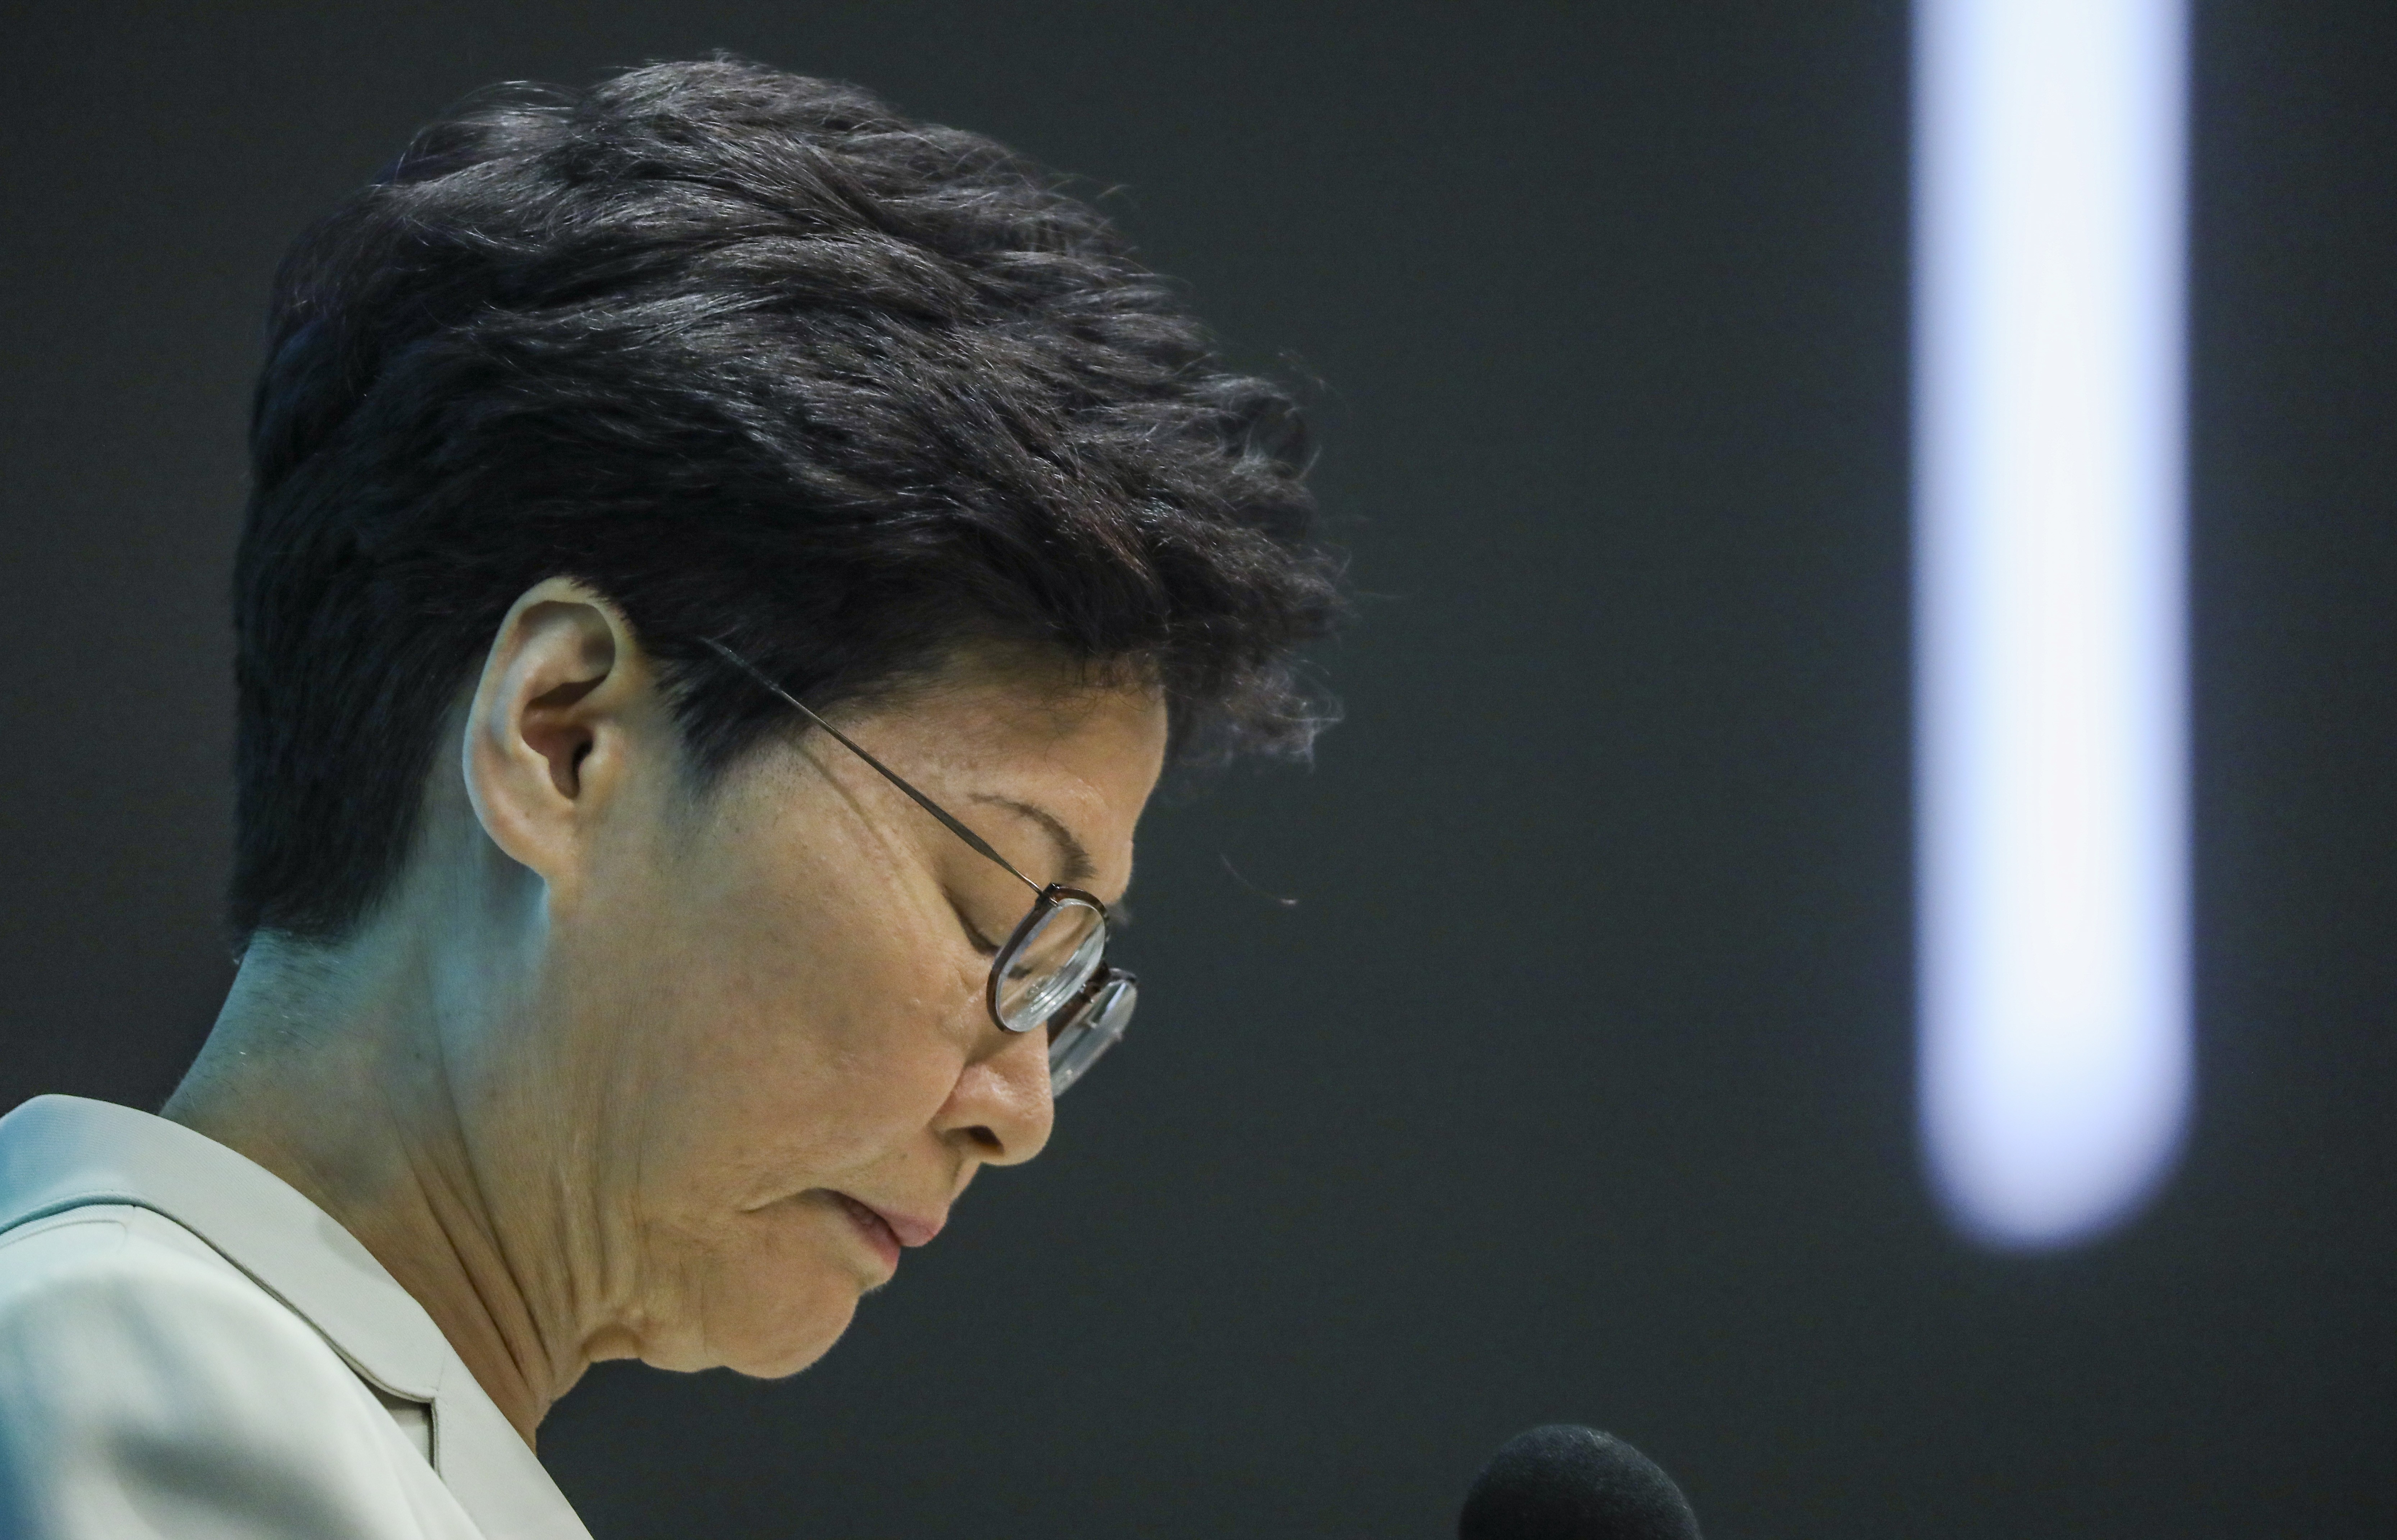 Carrie Lam says sorry, but stops short of bowing, as one of her predecessors did in 2012. Photo: Sam Tsang